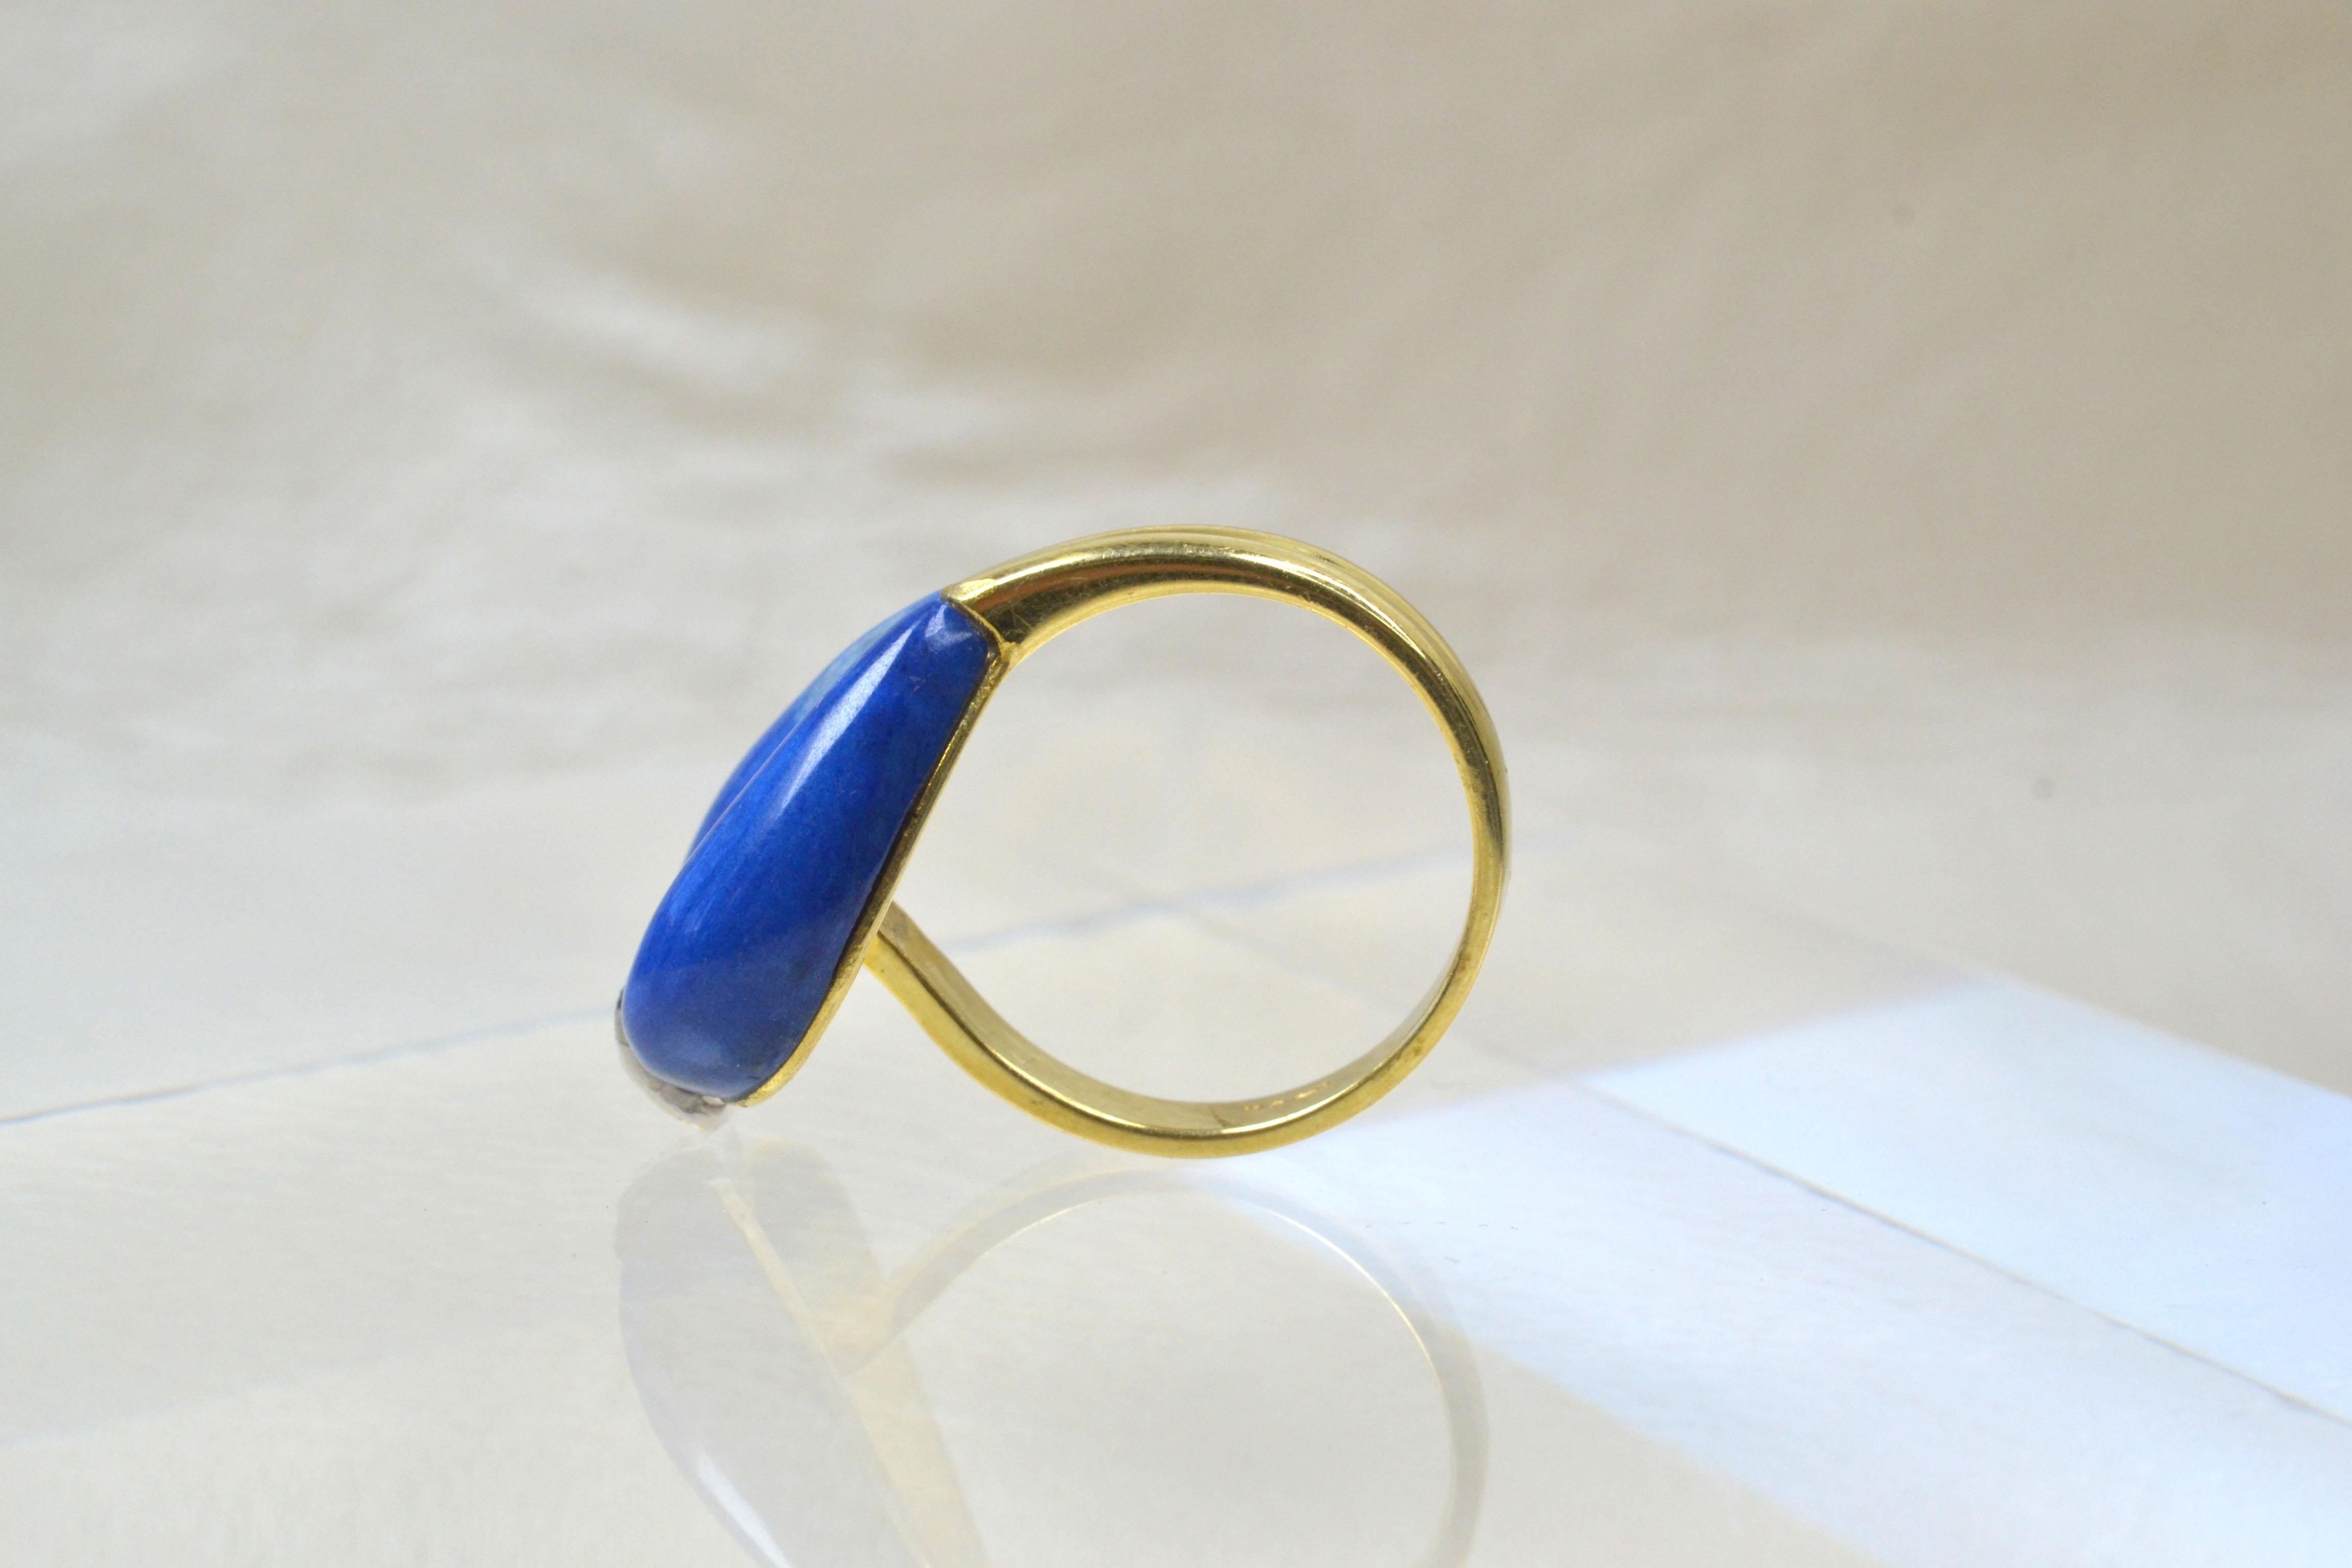 Revival Vintage 14k Gold Lapis Lazuli Teardrop Ring with Diamonds, One-of-a-kind For Sale